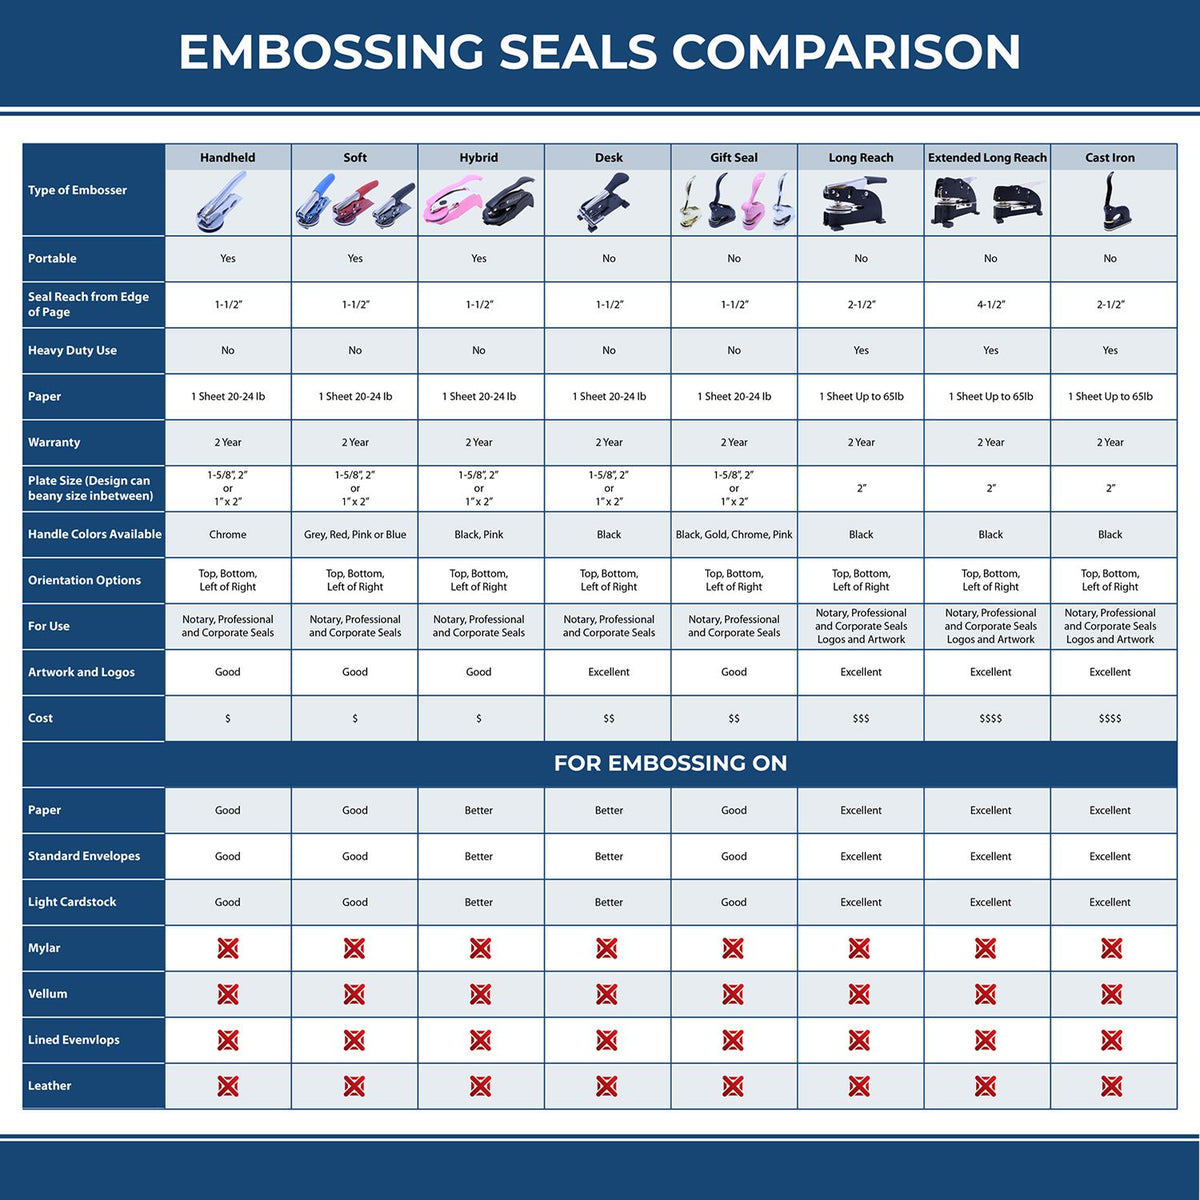 A comparison chart for the different types of mount models available for the Heavy Duty Cast Iron Colorado Architect Embosser.